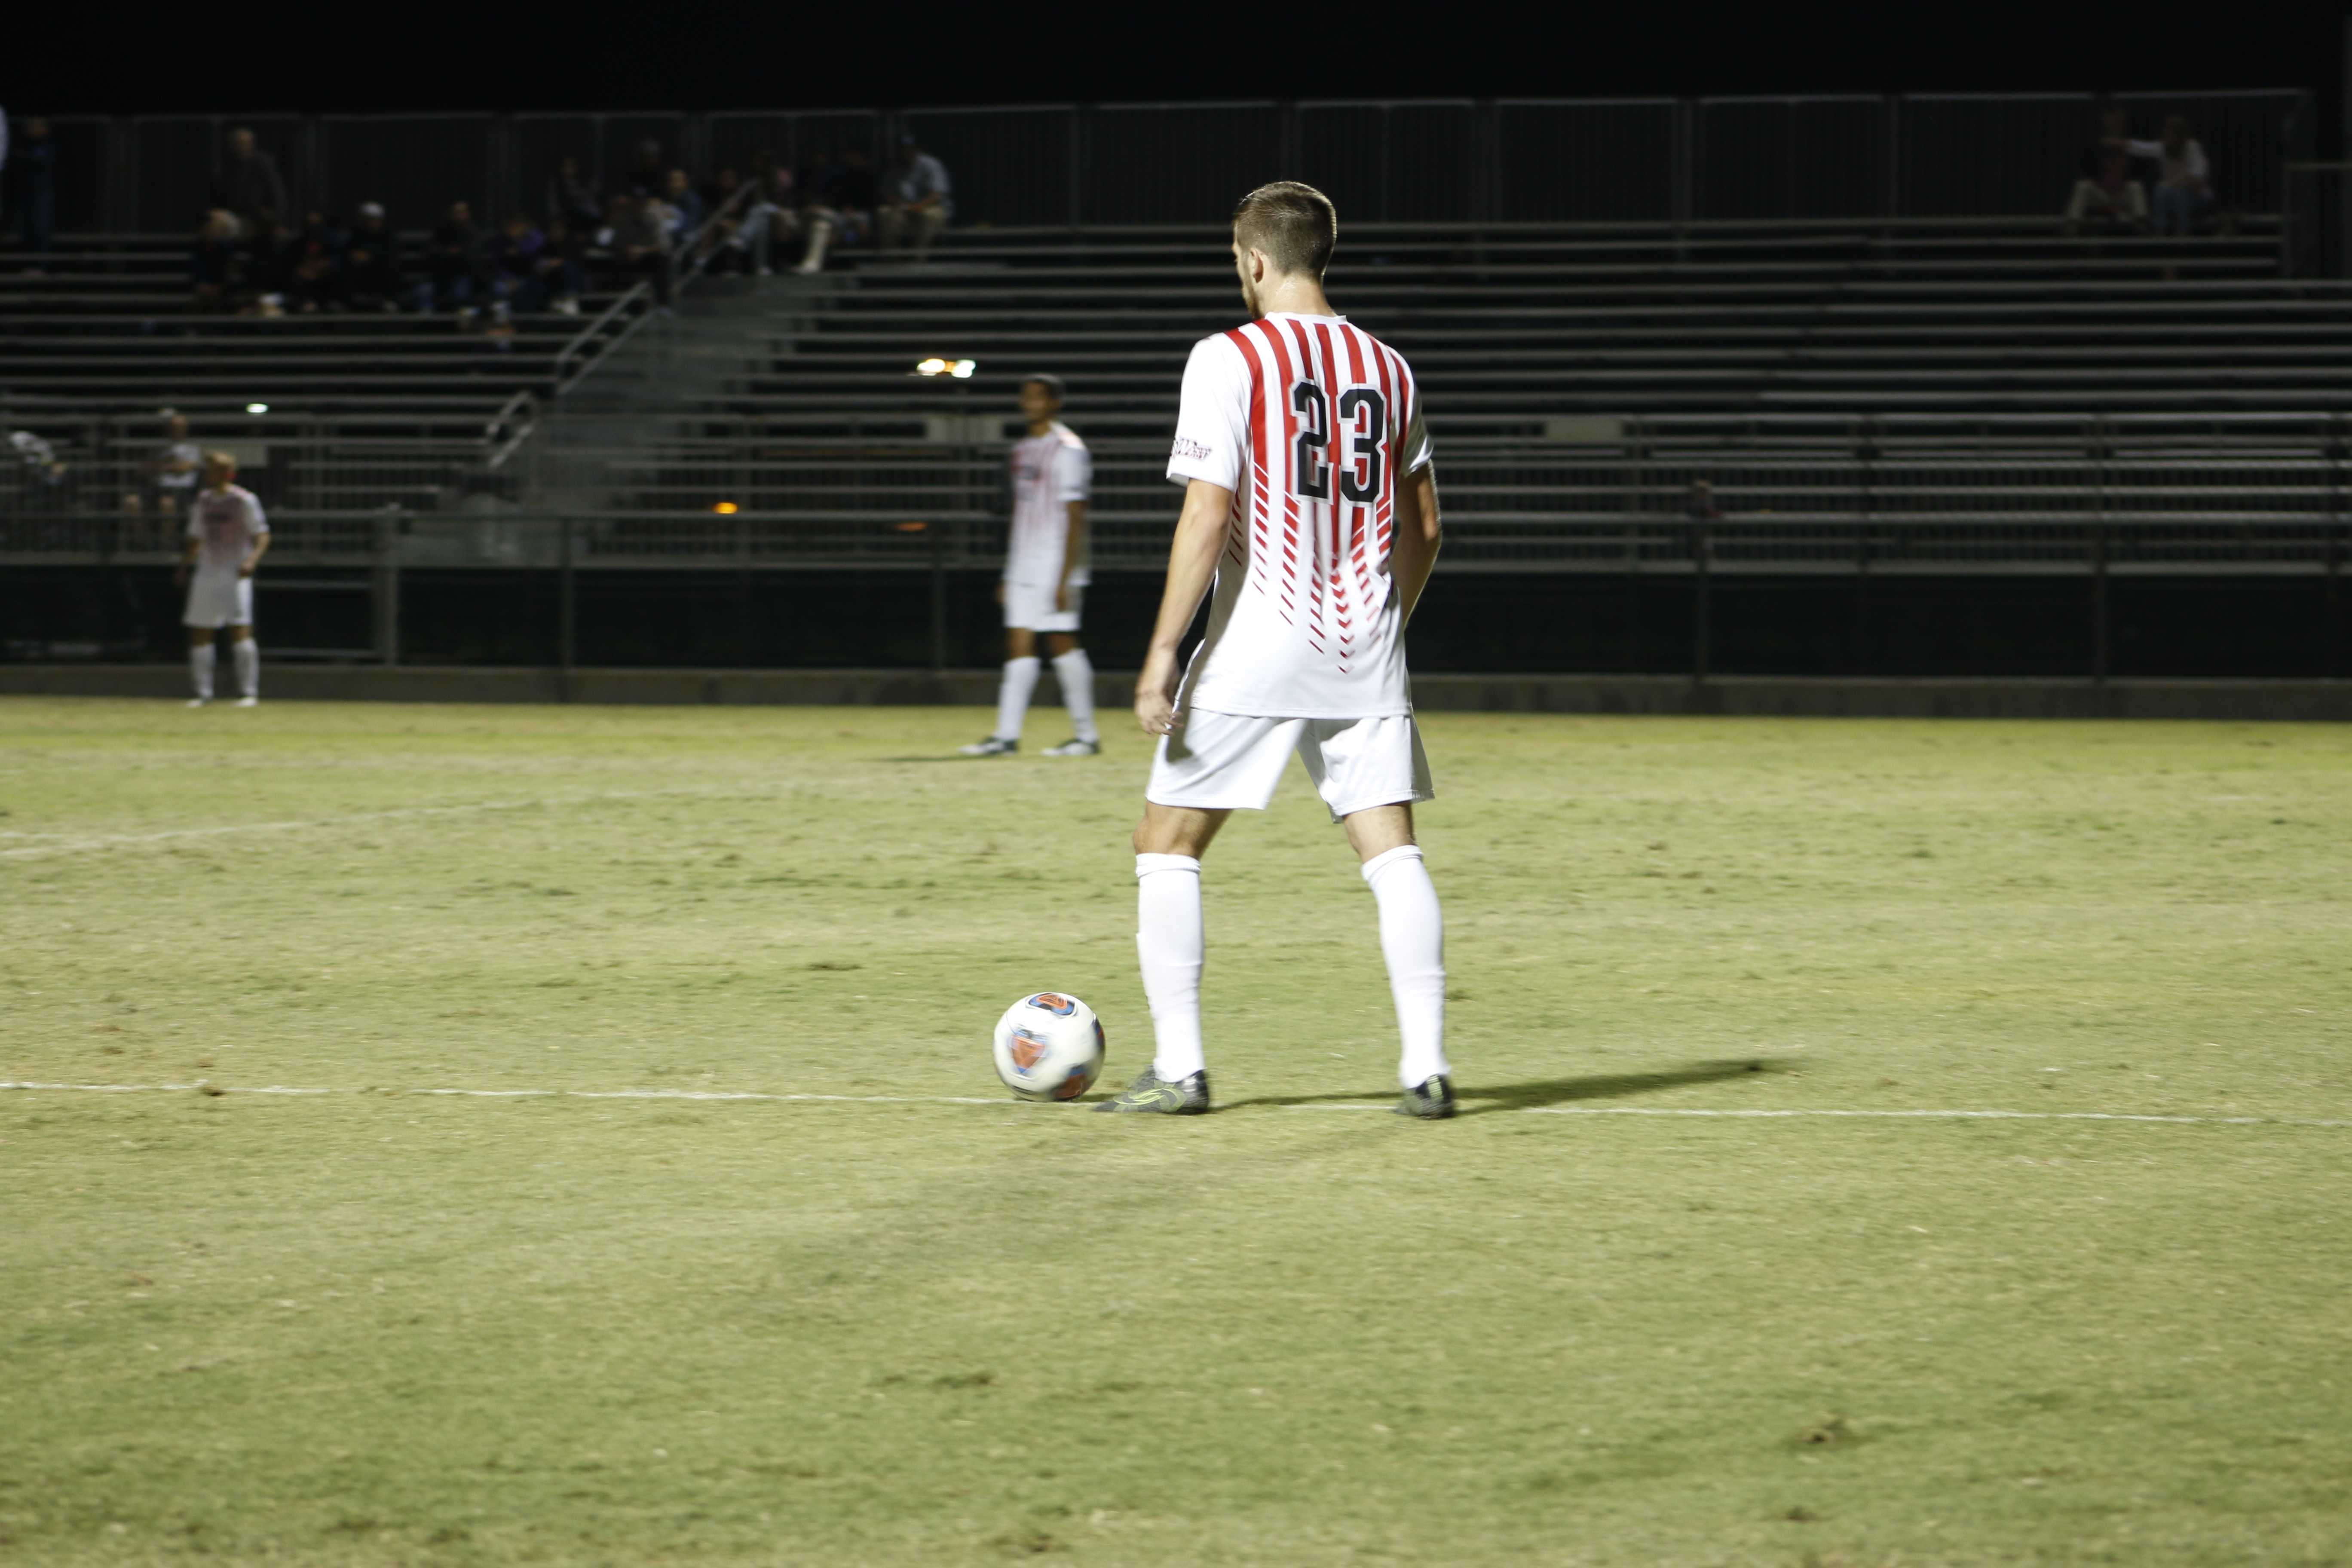 Patrick Hickman holds on to the ball while deciding which teammate to kick it to Photo credit: Kendall Faulkner